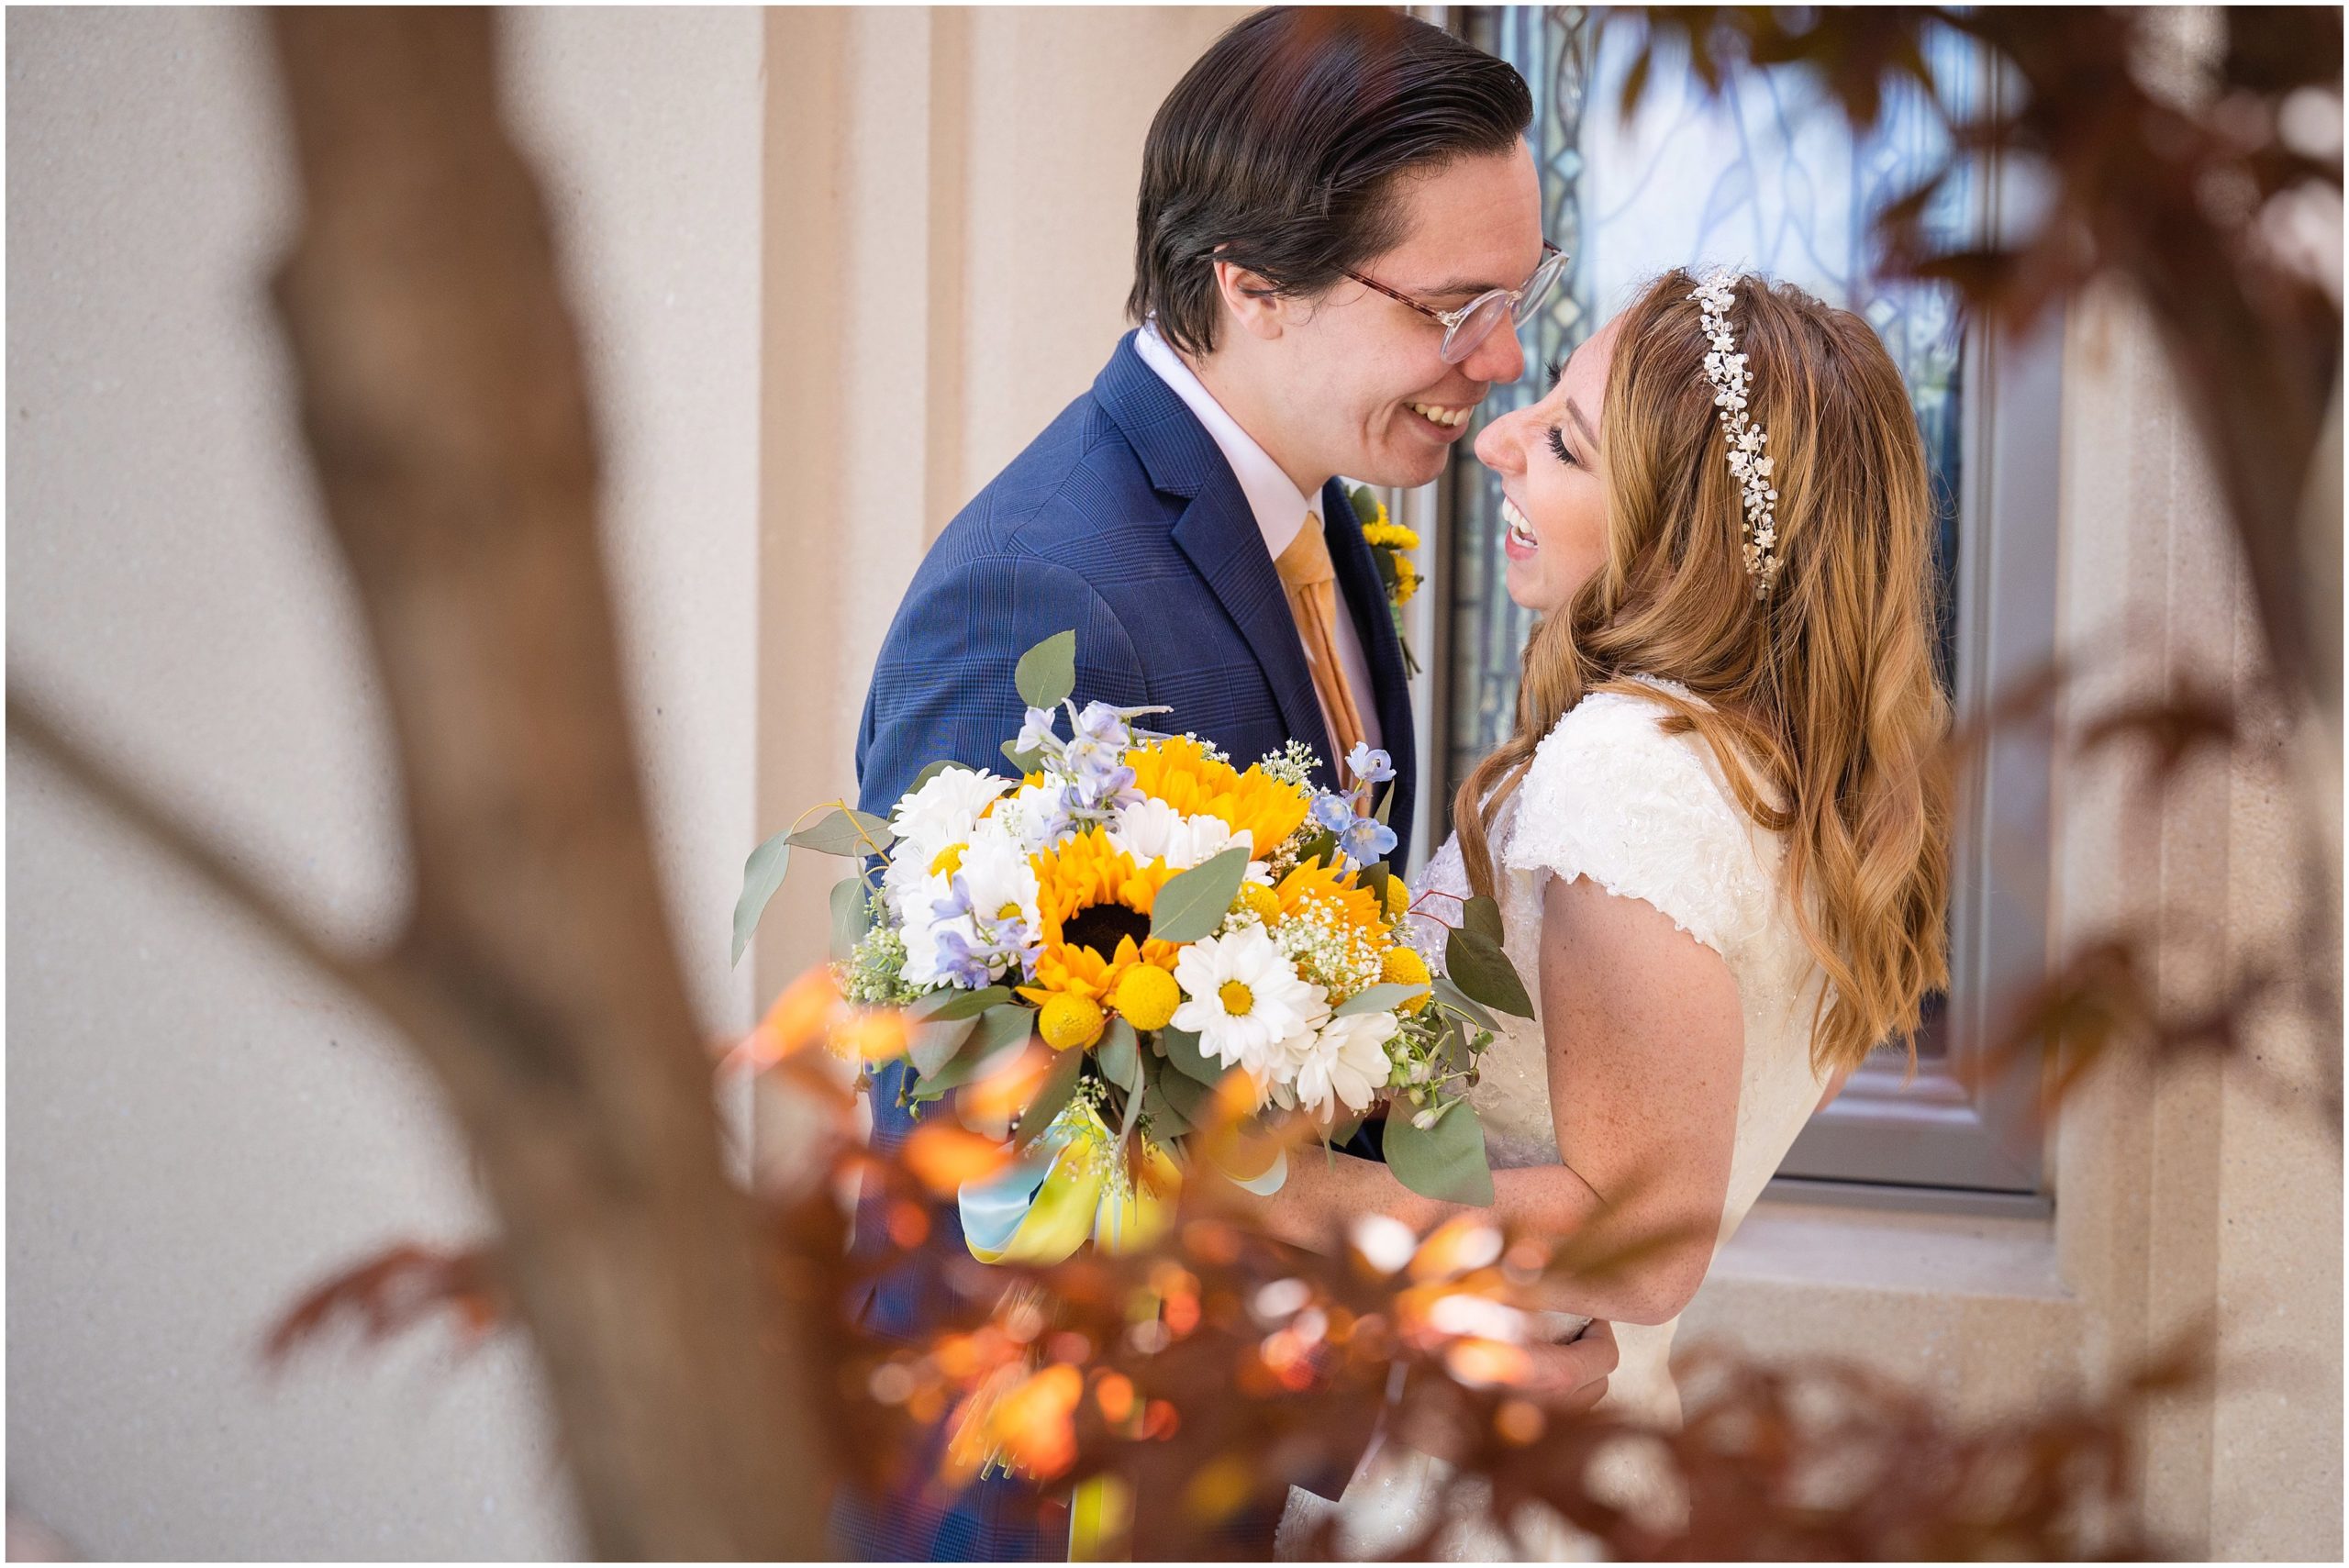 Bride and Groom portraits at the the temple | Payson Temple and White Willow Wedding | Jessie and Dallin Photography